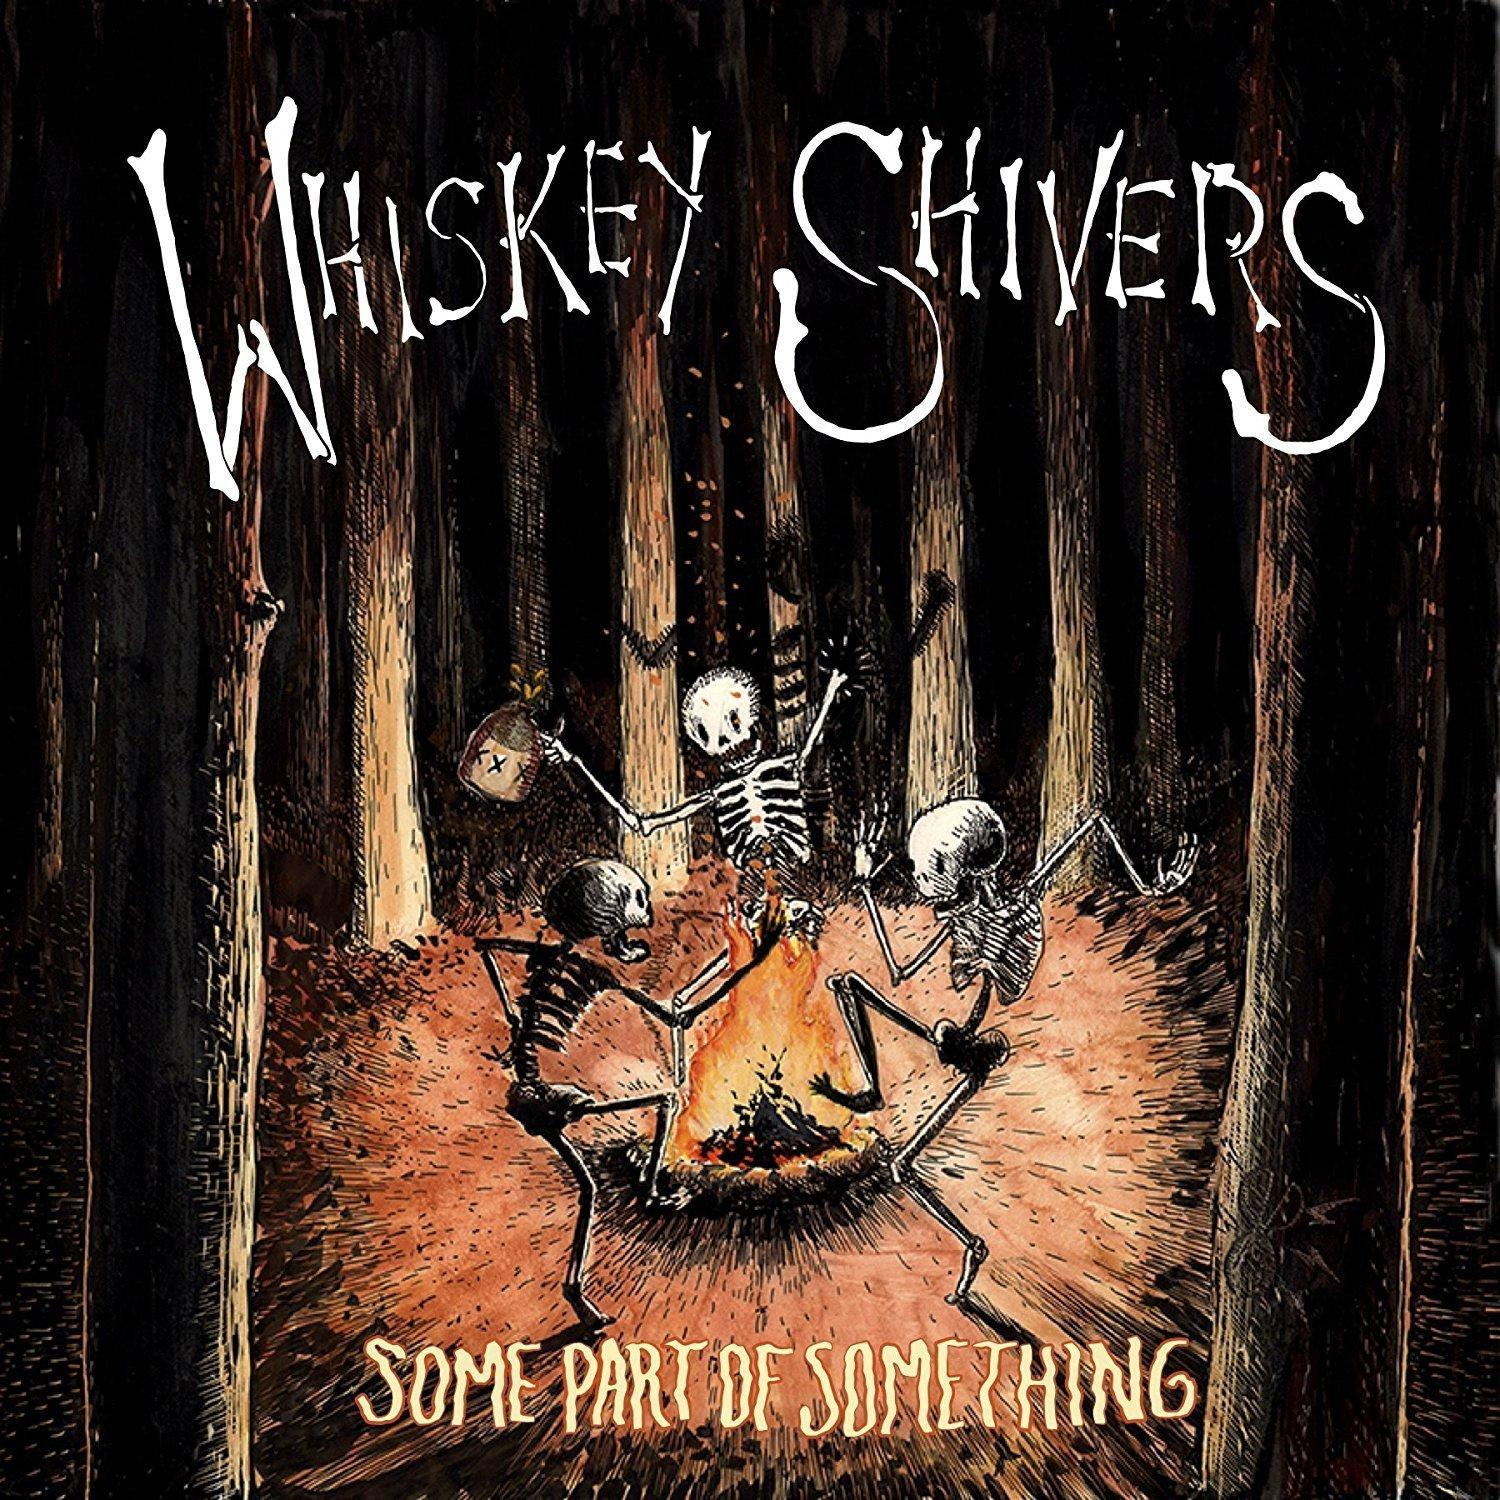 - Of Part Some Something - Whiskey (CD) Shivers